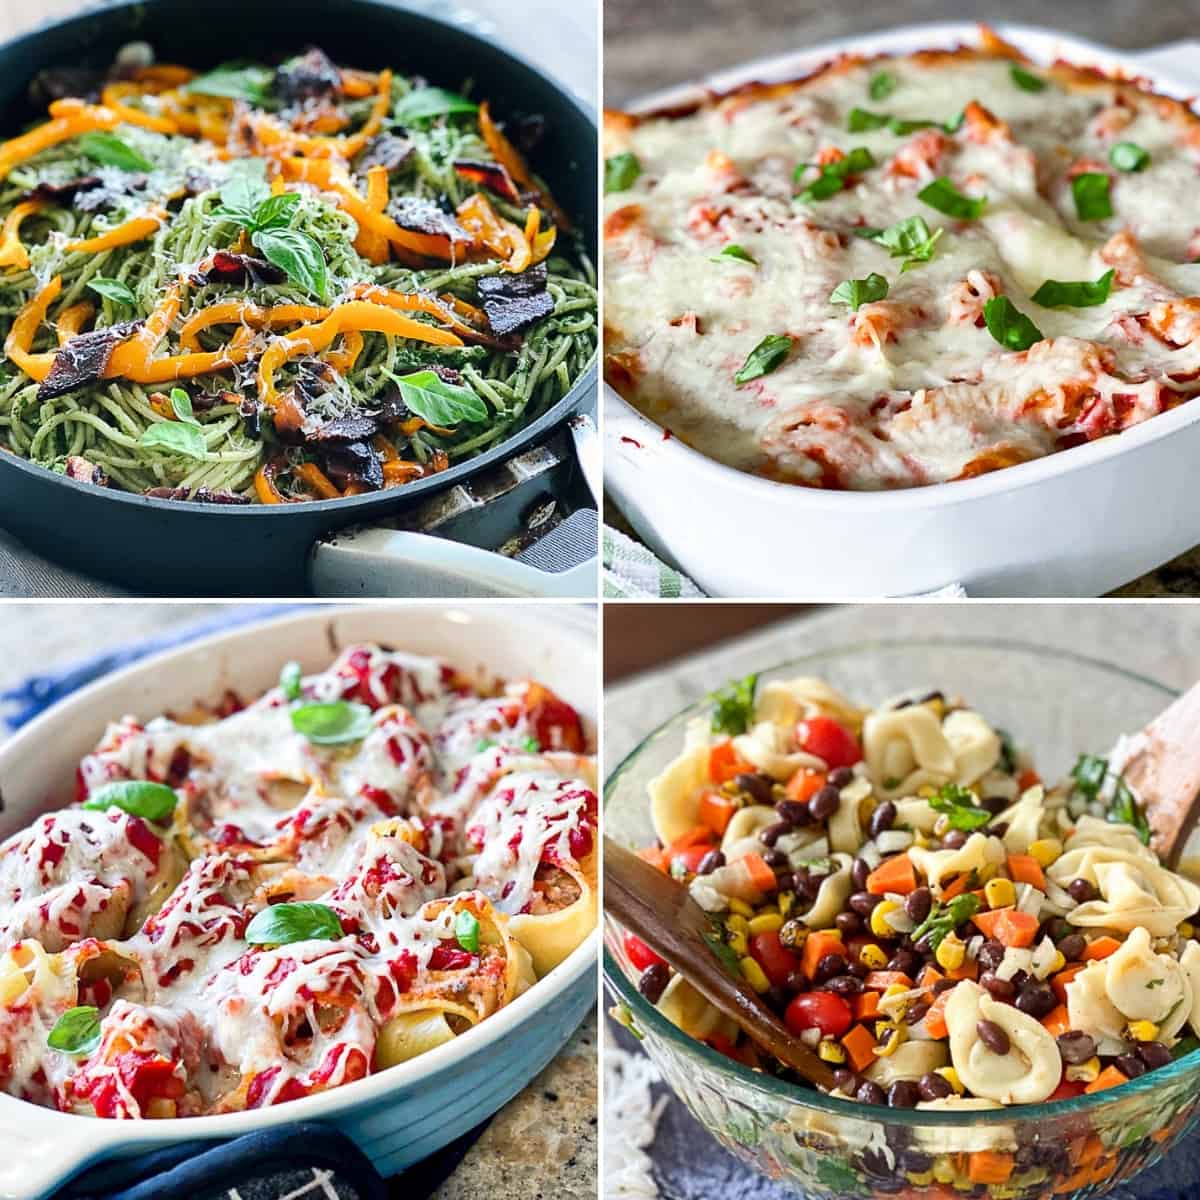 Collage of easy pasta side dish recipe ideas with baked pasta, pesto pasta, and cold pasta salad.